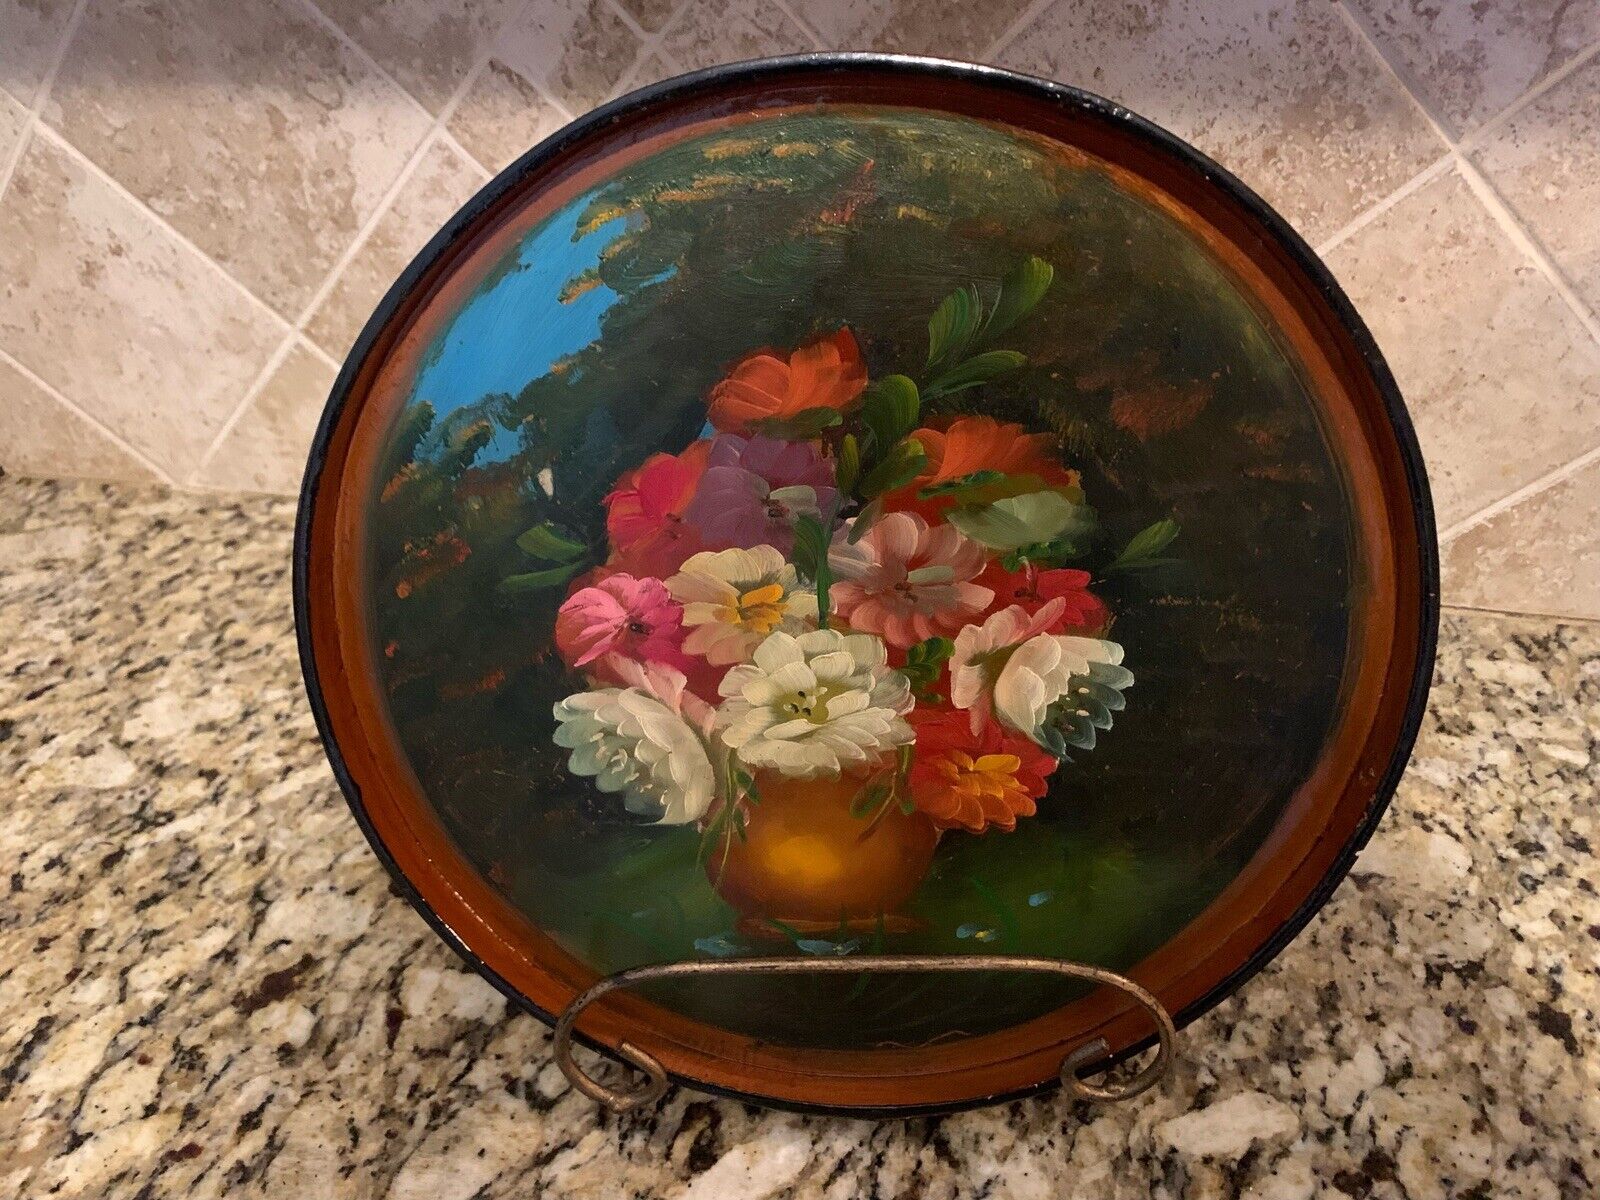 Vintage Round Wooden Tole Tray Black With Painted Floral Design With Handles